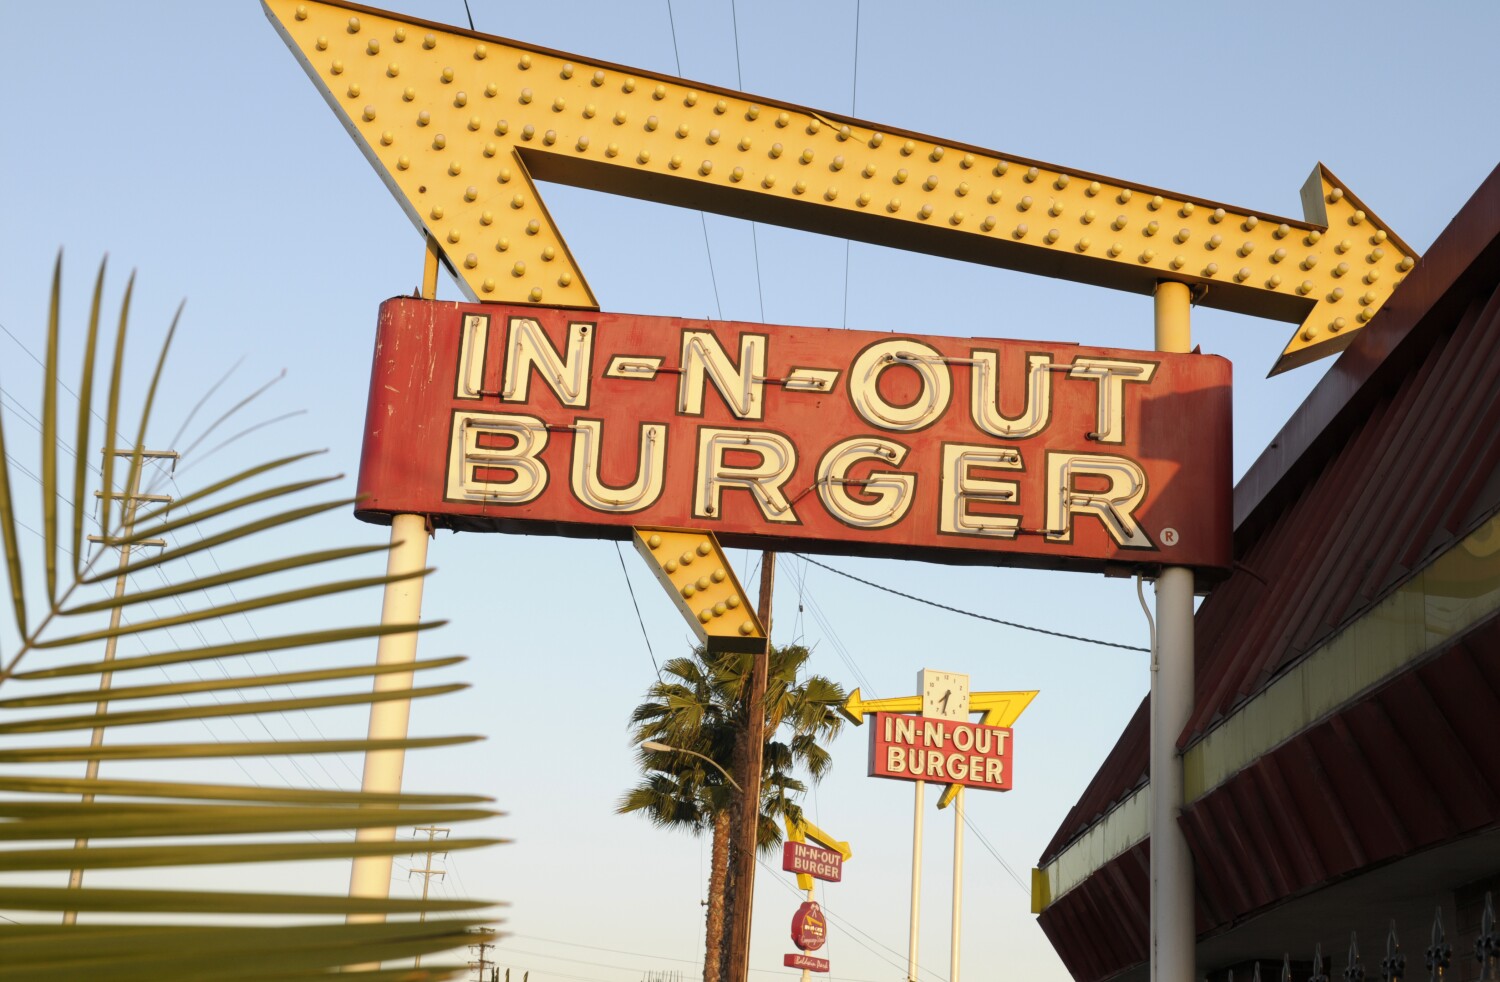 Podcast: In-N-Out Burger enters the COVID-19 wars